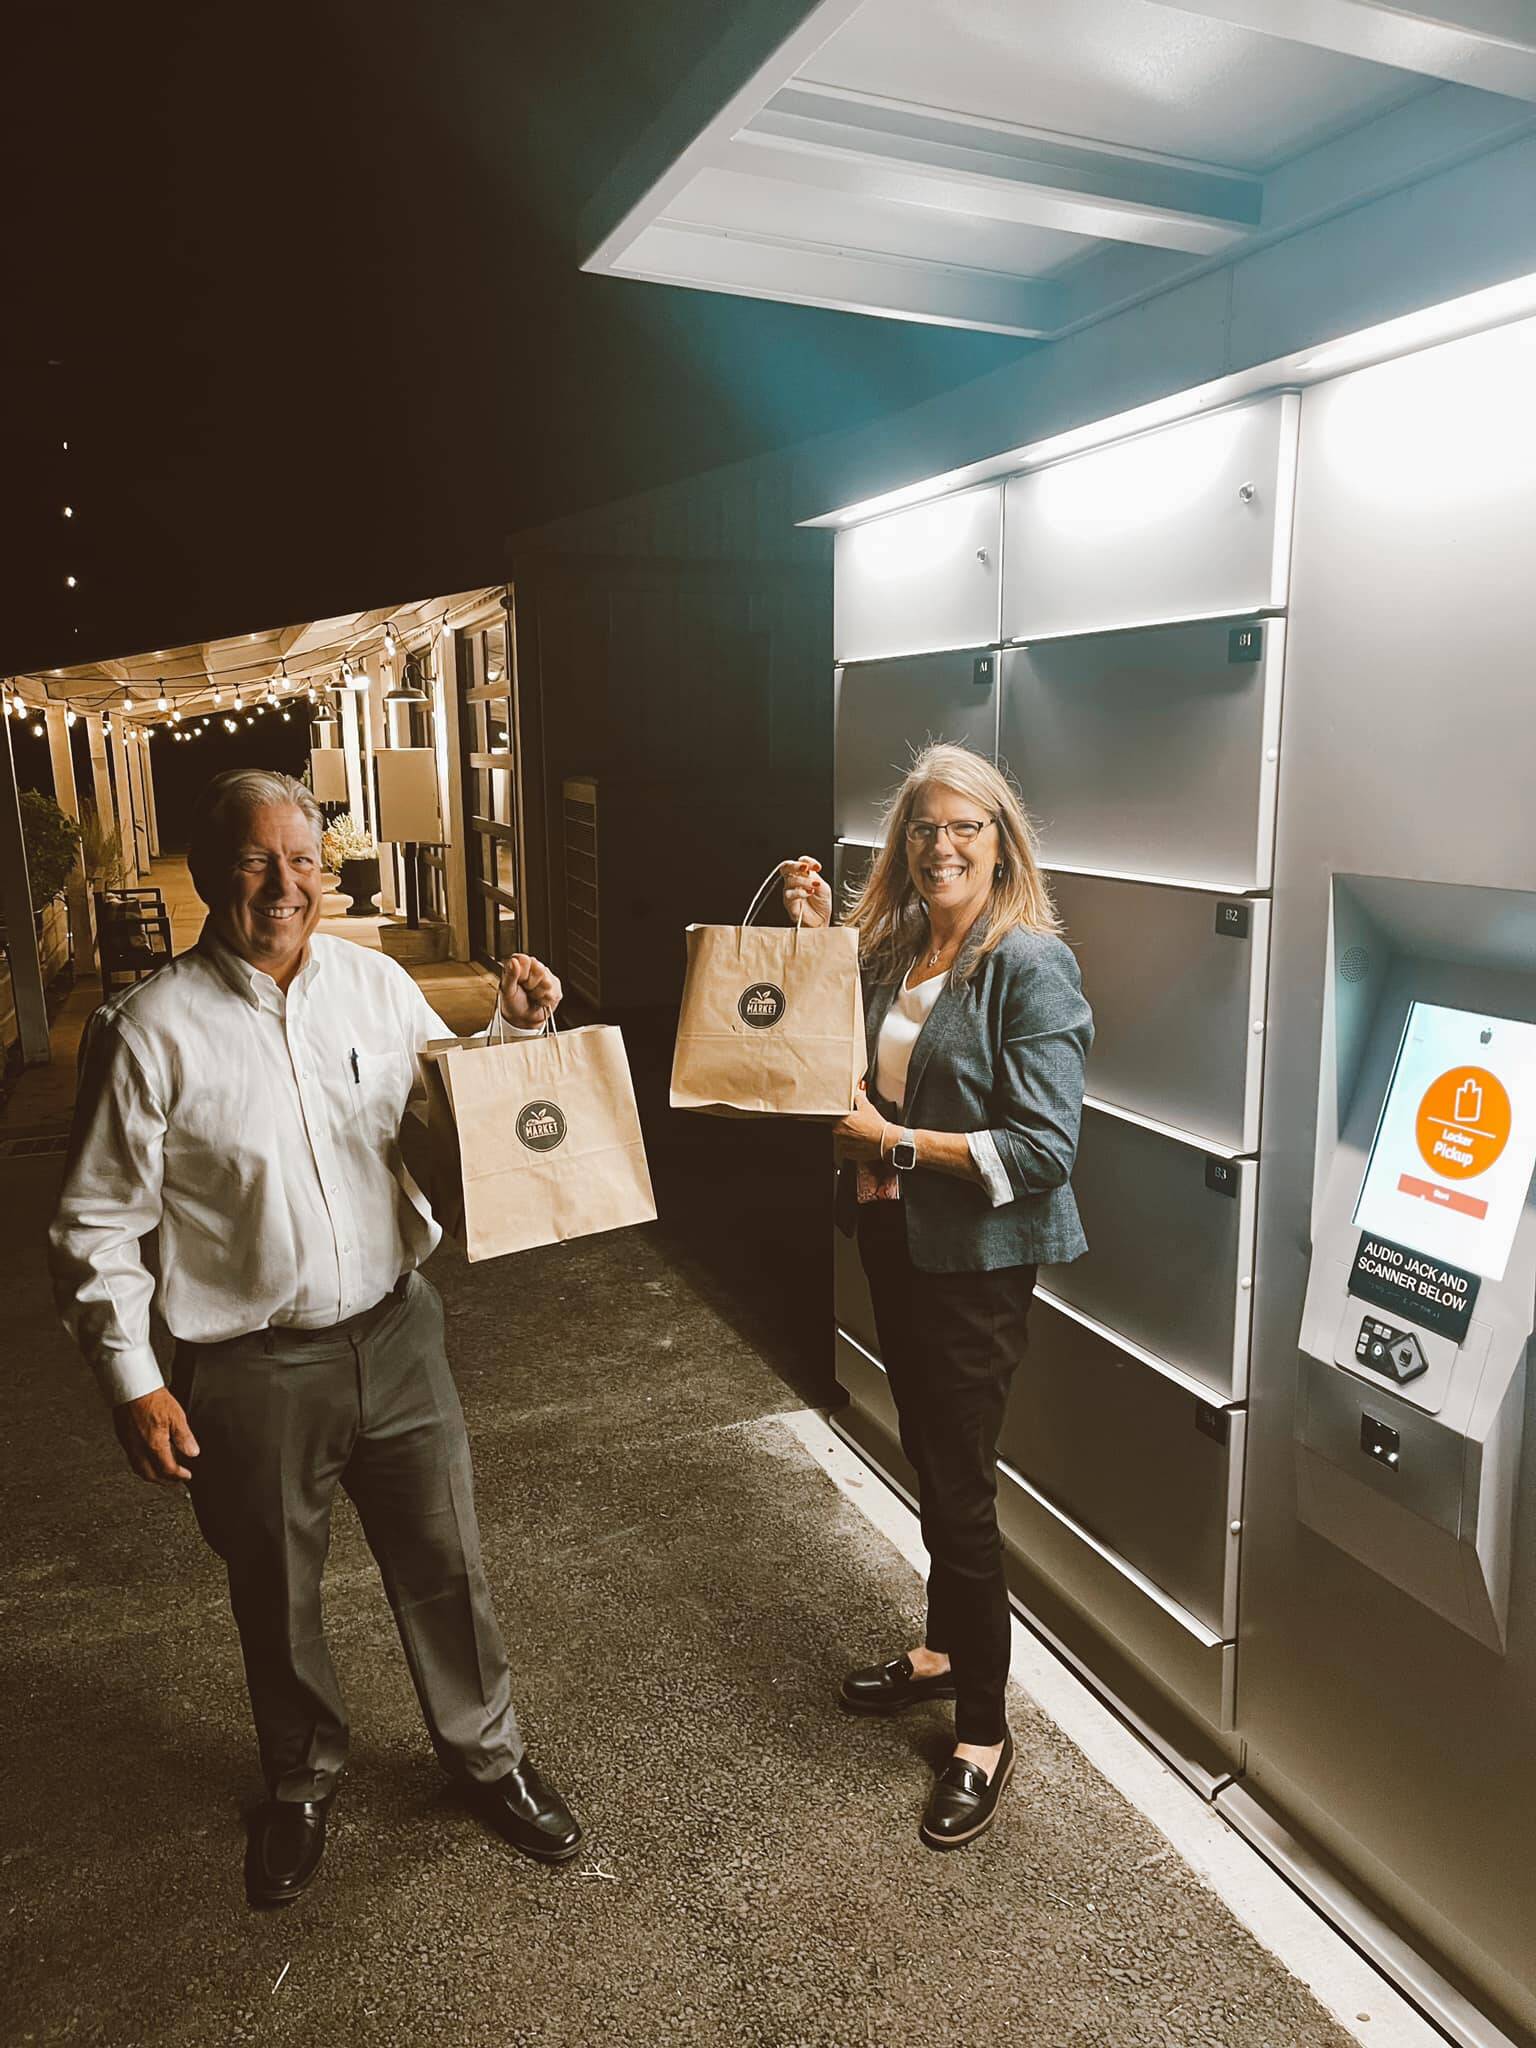 Courtesy photo
Pierce County Council member Dave Morell and his assistant Judy Hurley, who lobbied the county to fund The Market’s locker, pick up an order of fresh food.